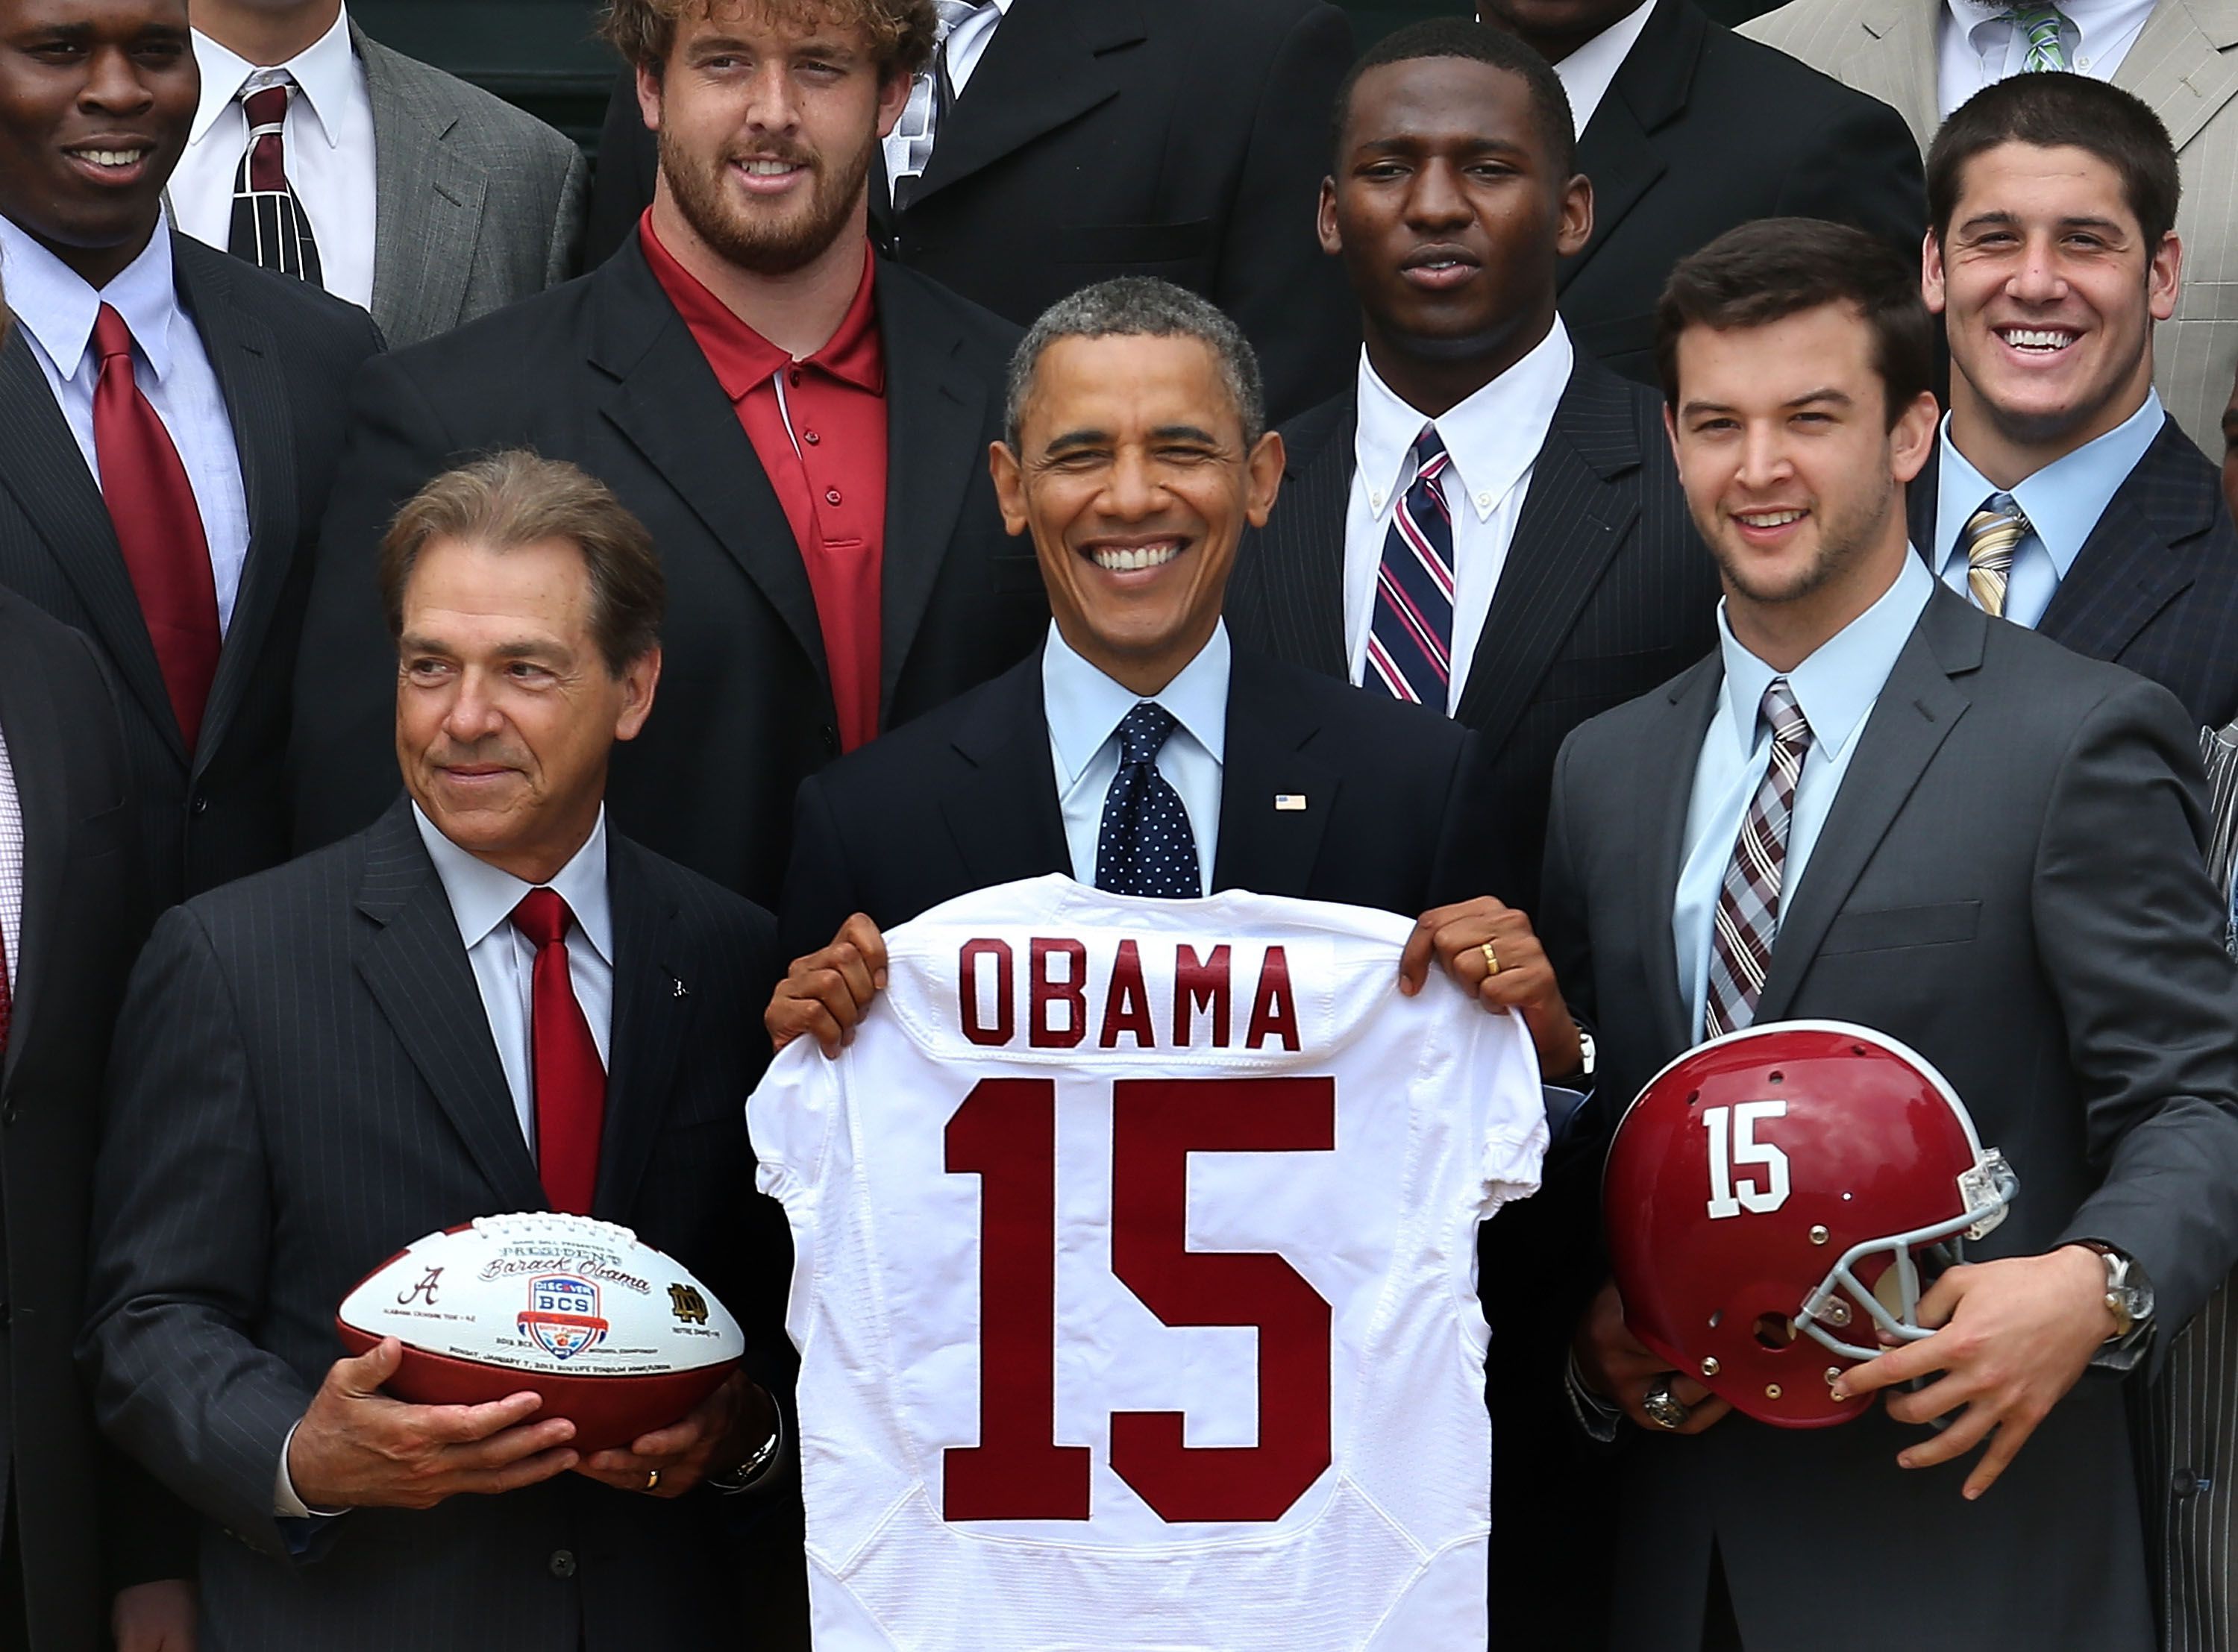 Picture of Barack Obama surrounded by members of the Alabama football team while holding a football jersey that says "Obama" on the back with the number 15